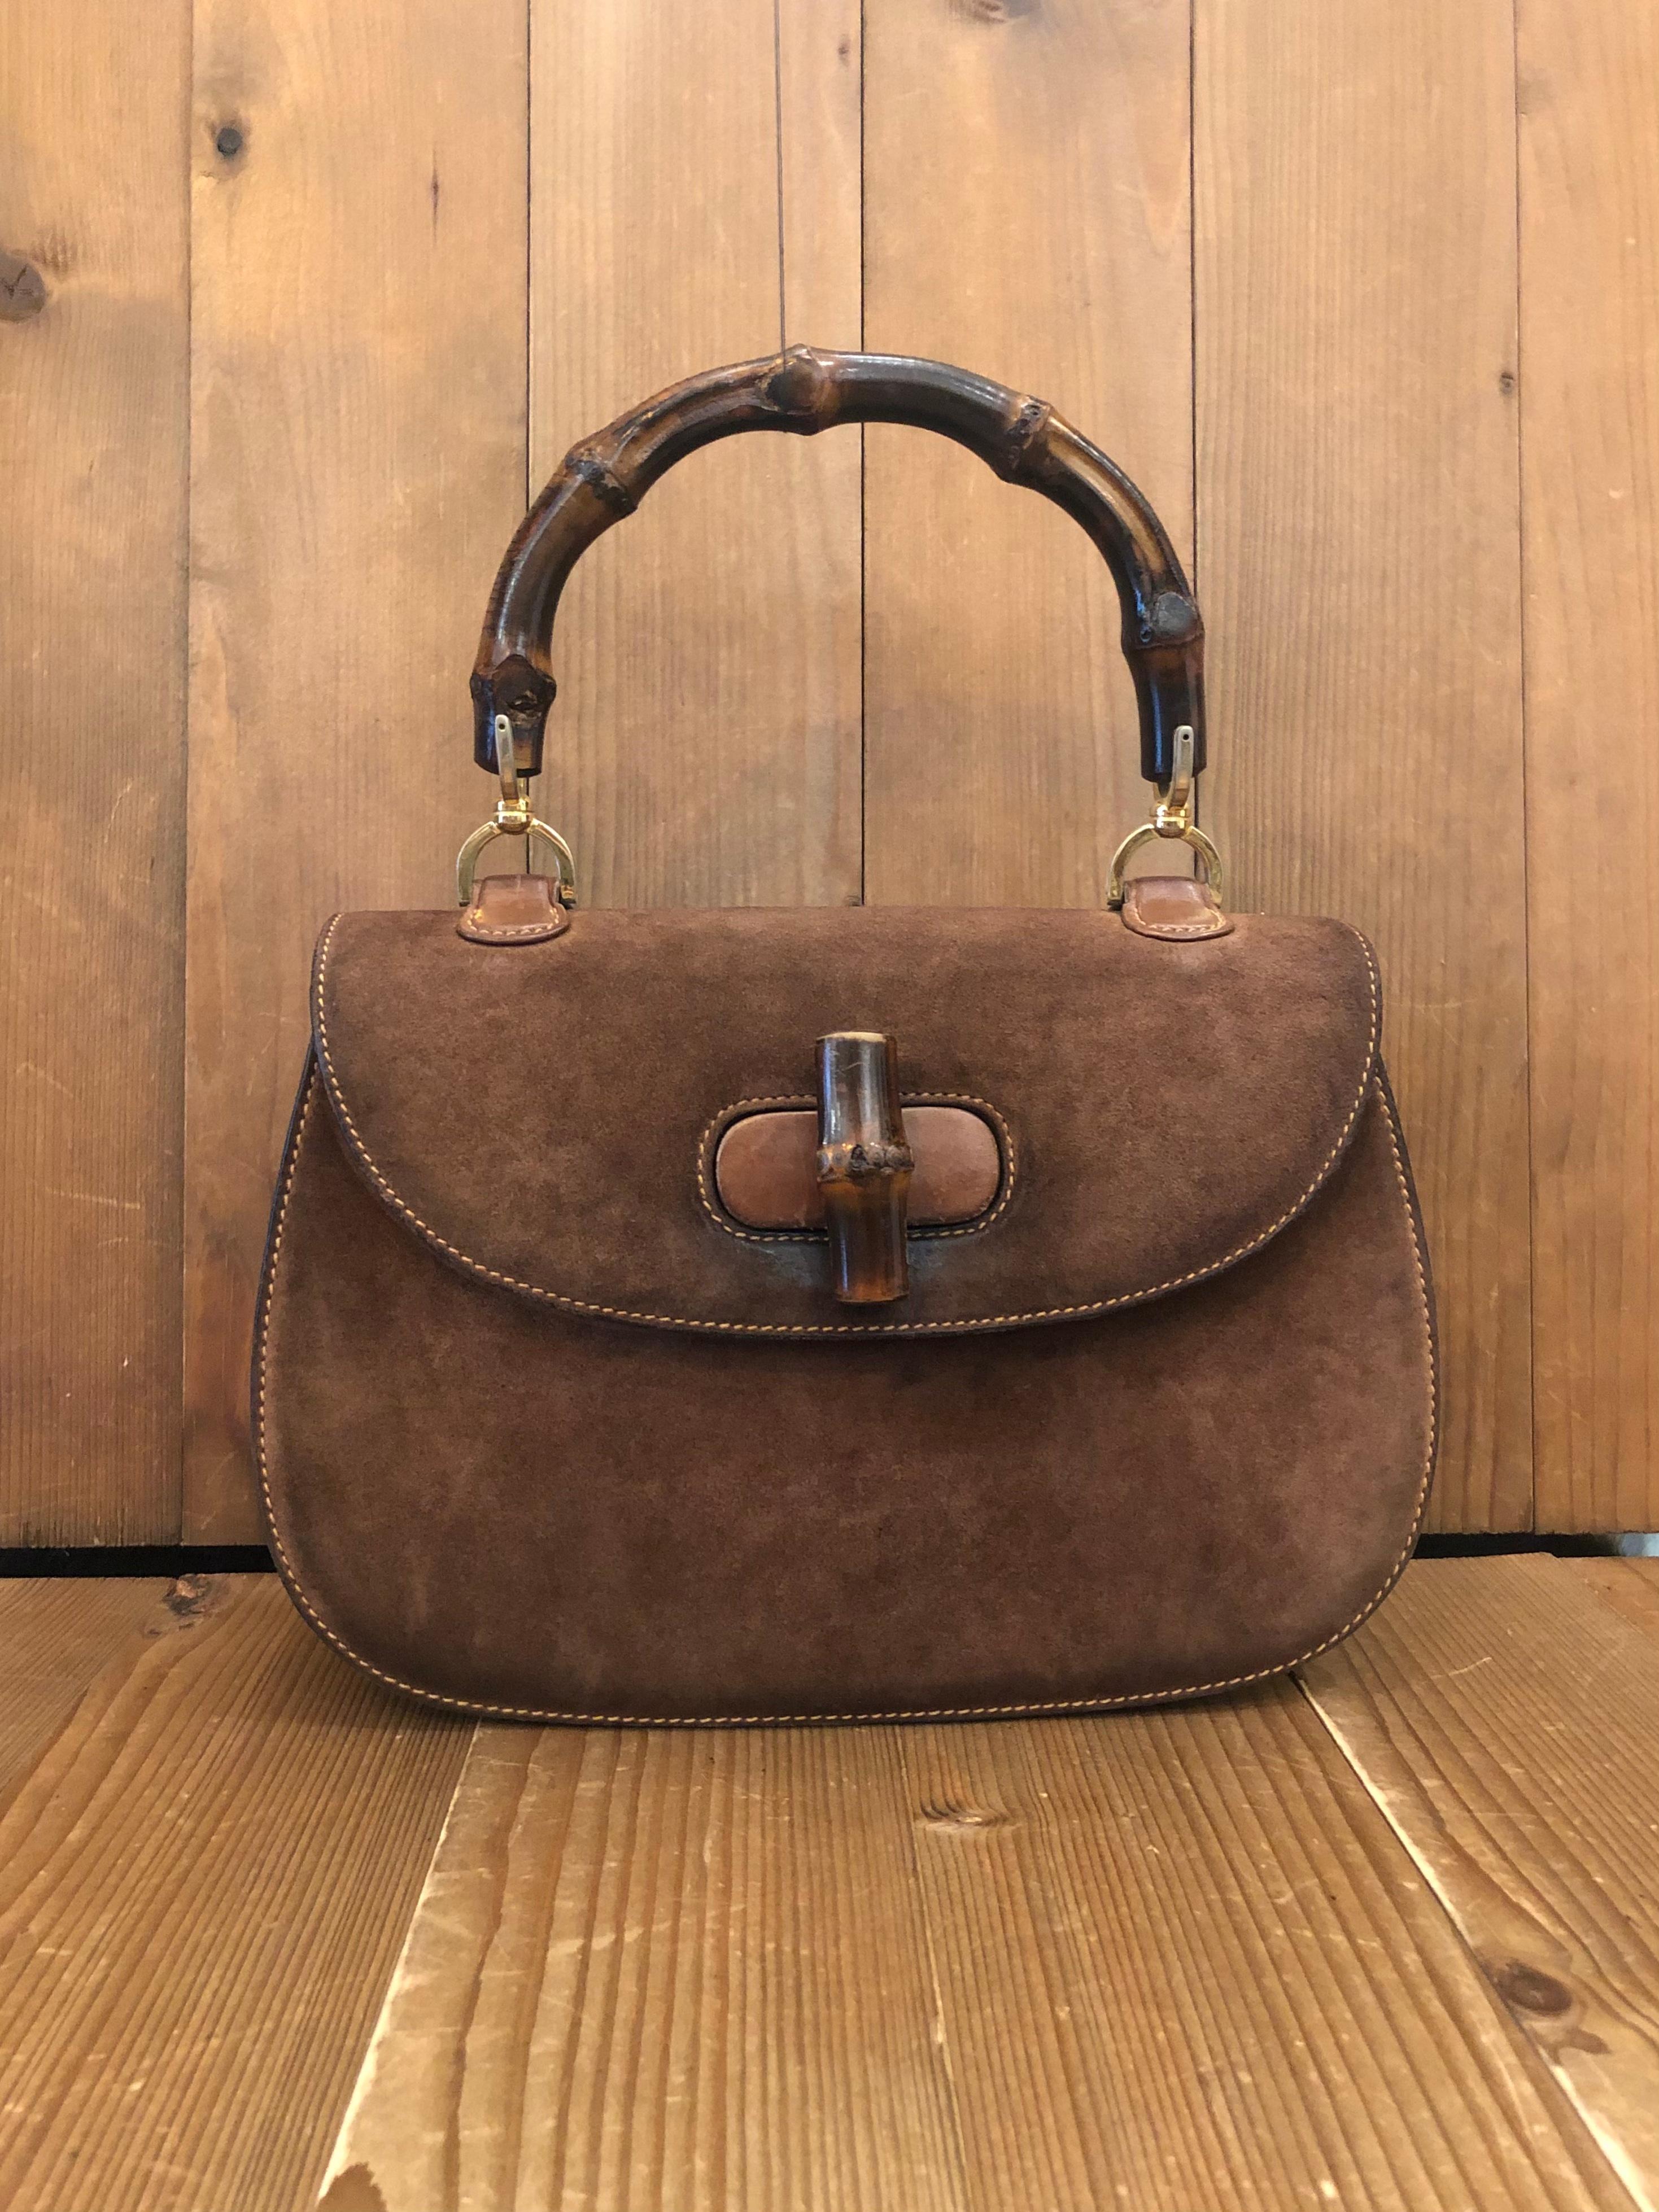 This vintage GUCCI bamboo top handle handbag is crafted of nu buck leather in brown featuring gold toned hardware and a signature Gucci bamboo handle. Front flap bamboo turnlock closure opens to a beige leather interior featuring zippered and patch